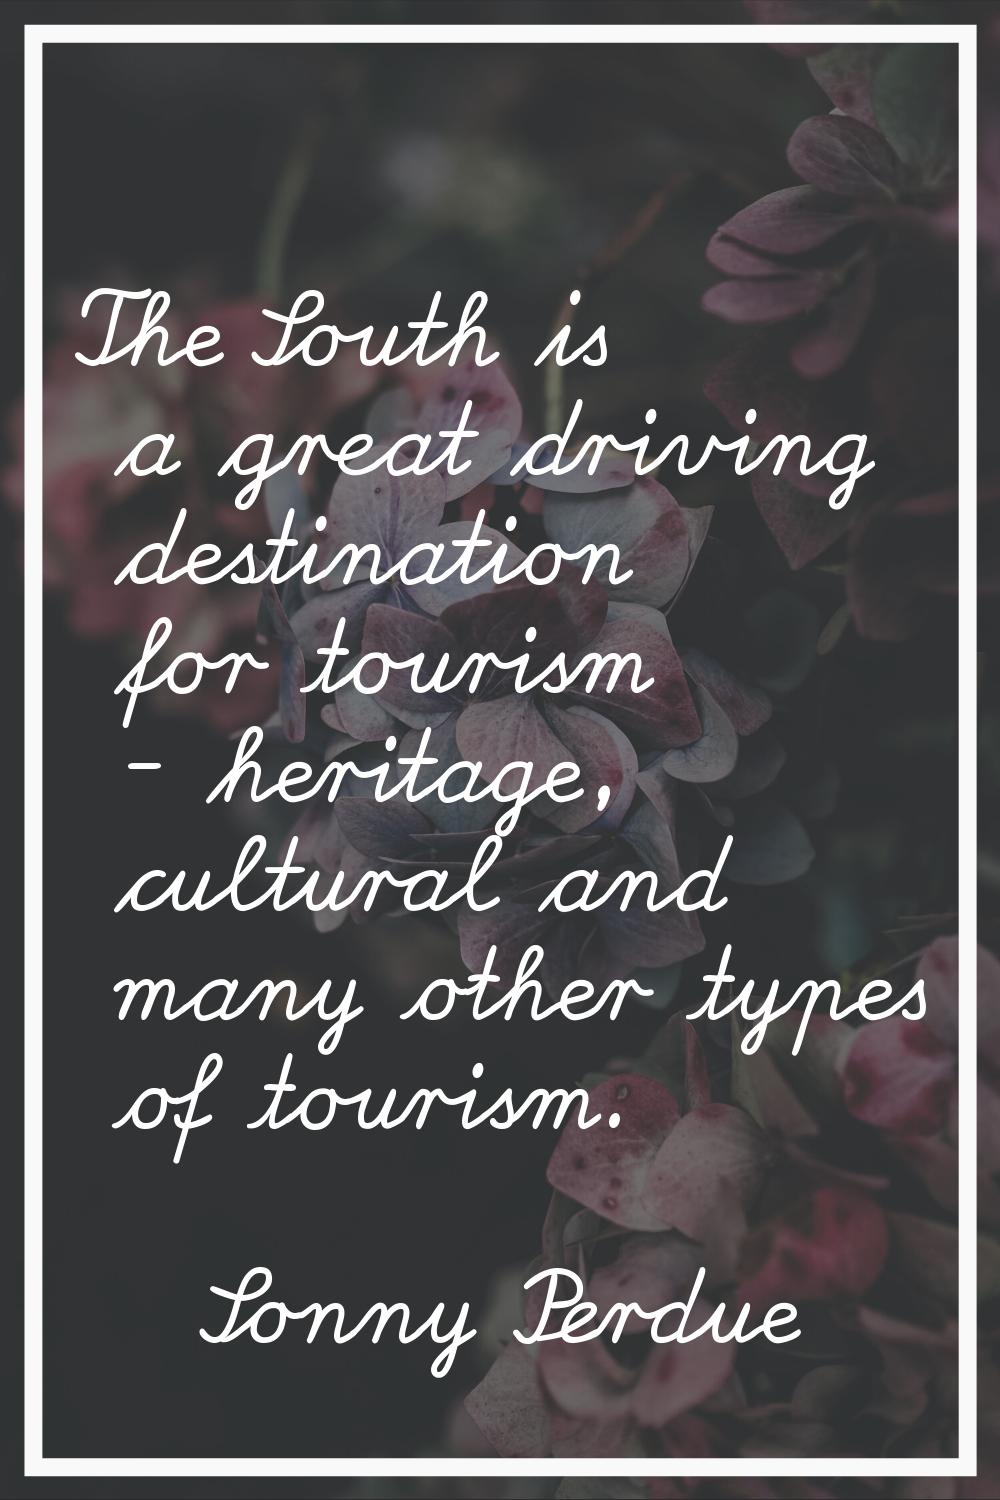 The South is a great driving destination for tourism - heritage, cultural and many other types of t